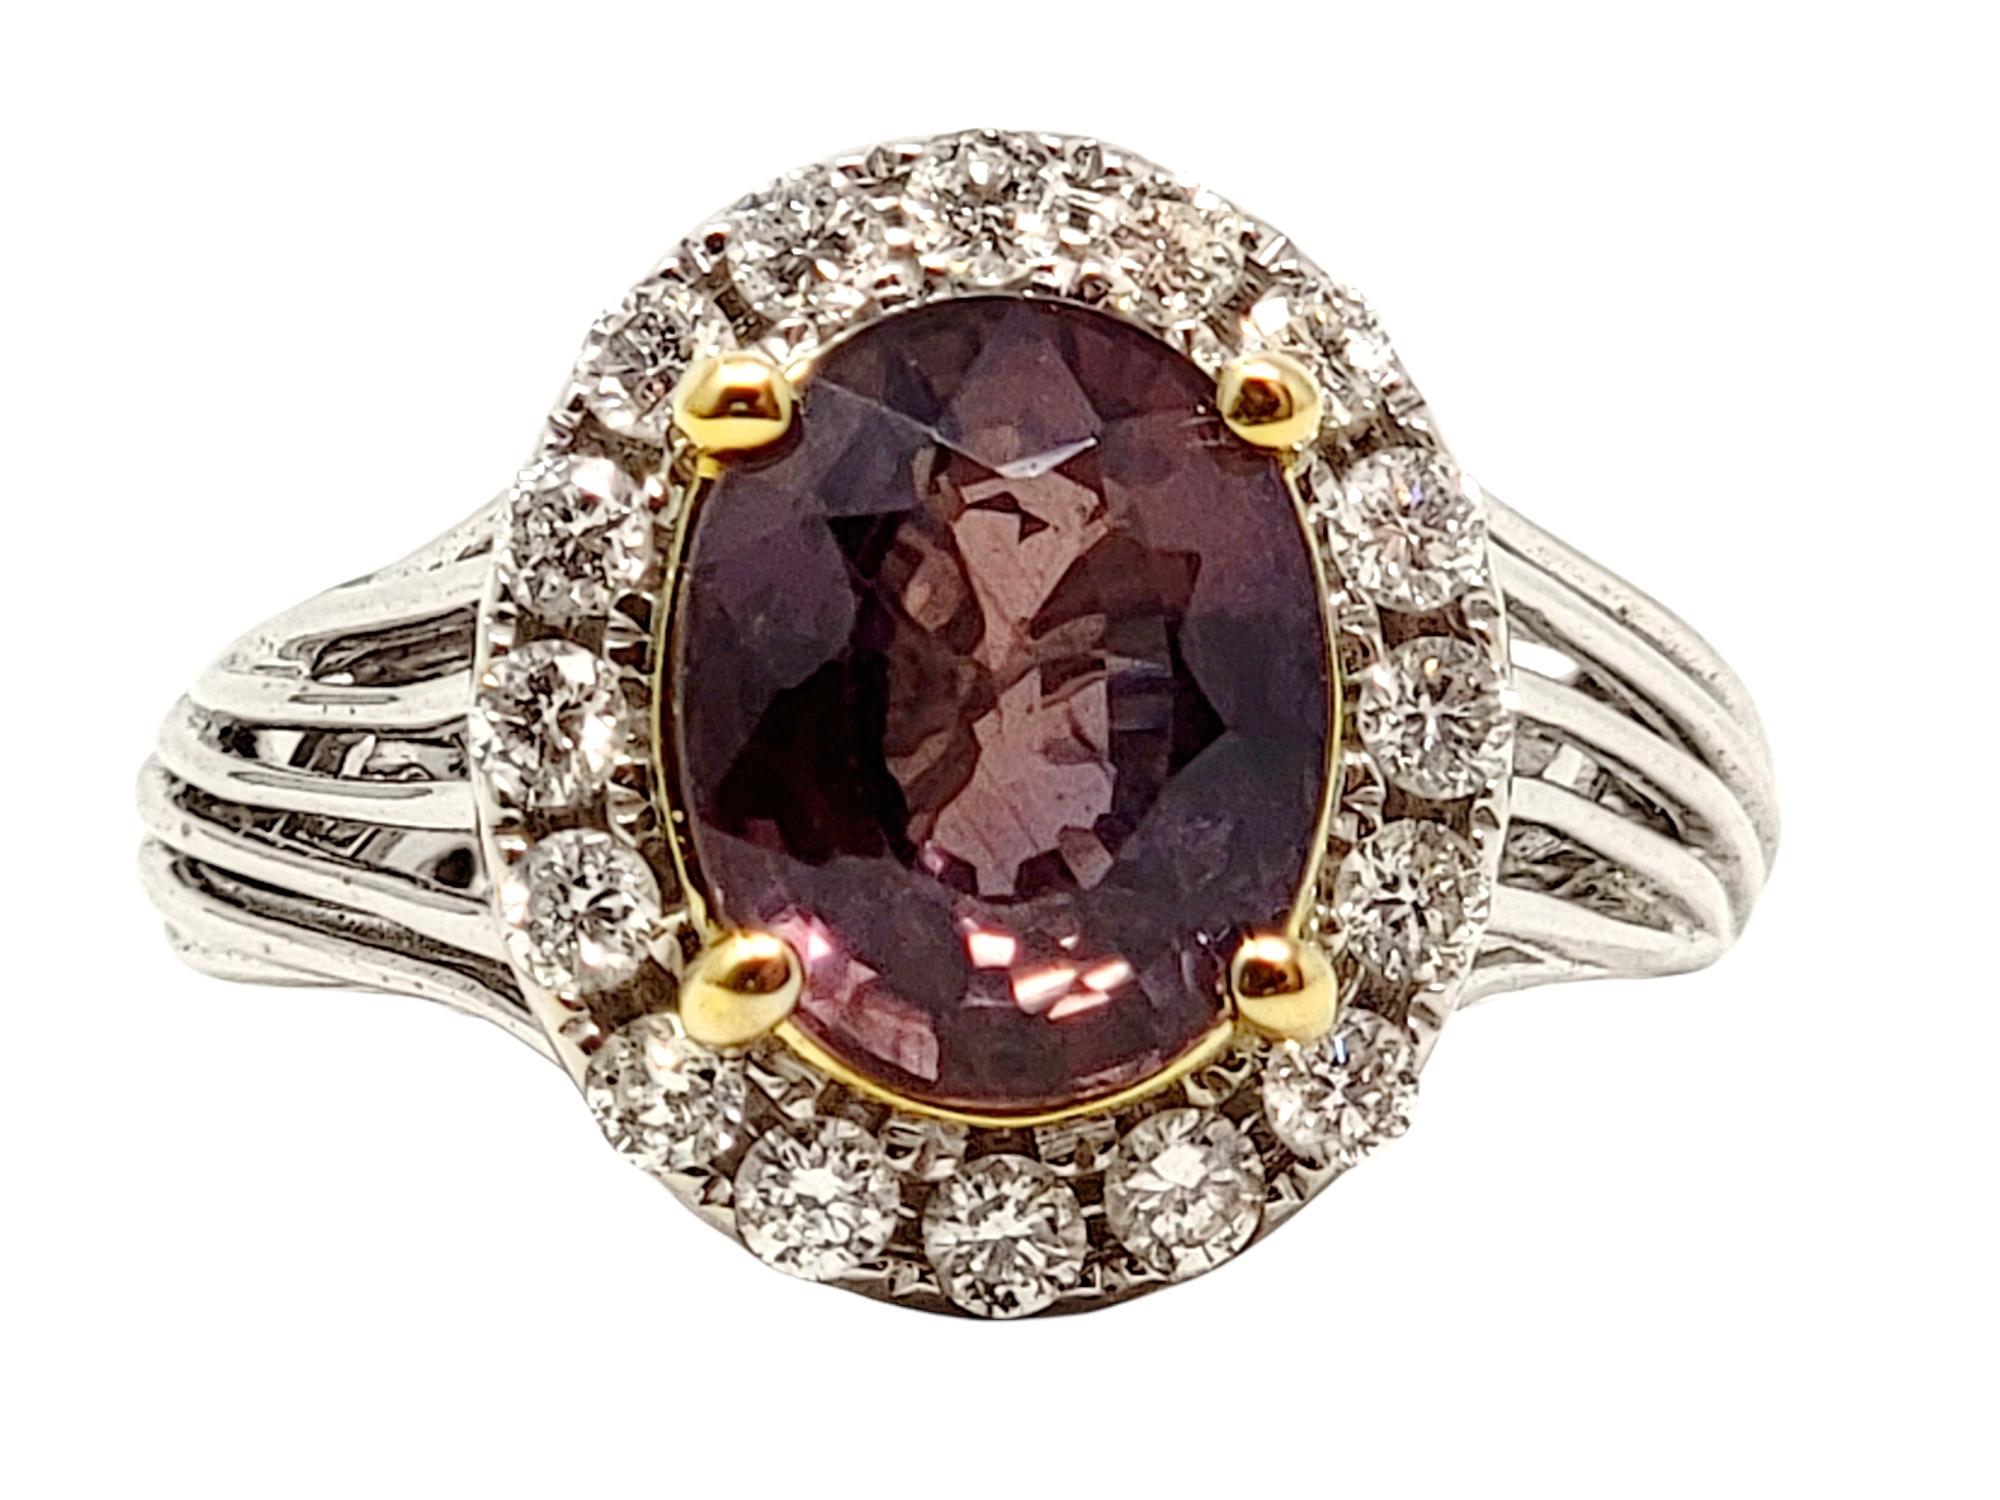 Ring size: 5.75

Gorgeous and unique color-change sapphire and diamond halo ring will light up your finger! The stunning main stone varies in color depending on the light, while the icy natural diamonds shimmer beautifully around it. 

Ring type: